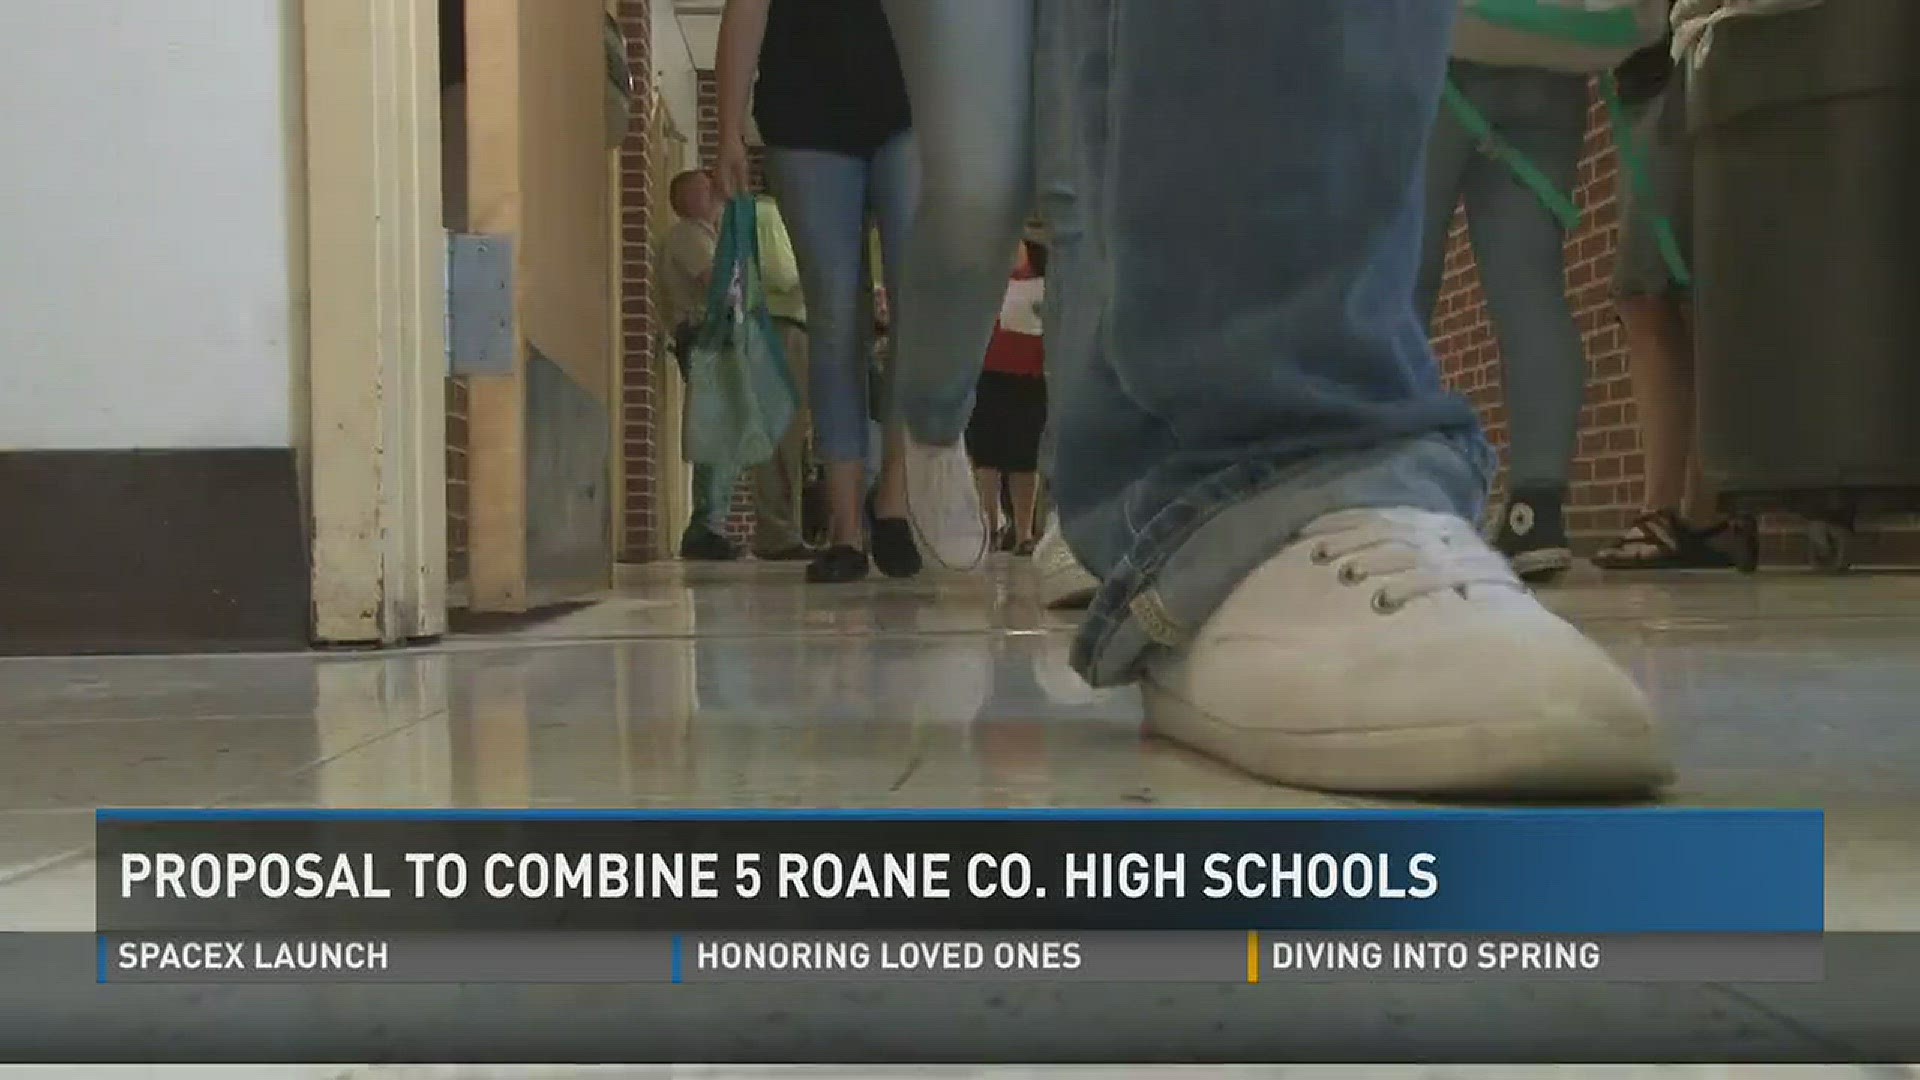 Feb. 17, 2017: The Roane County Board of Education gave the green light to moving ahead with a controversial change of combining the county's five high schools into one "mega-school."